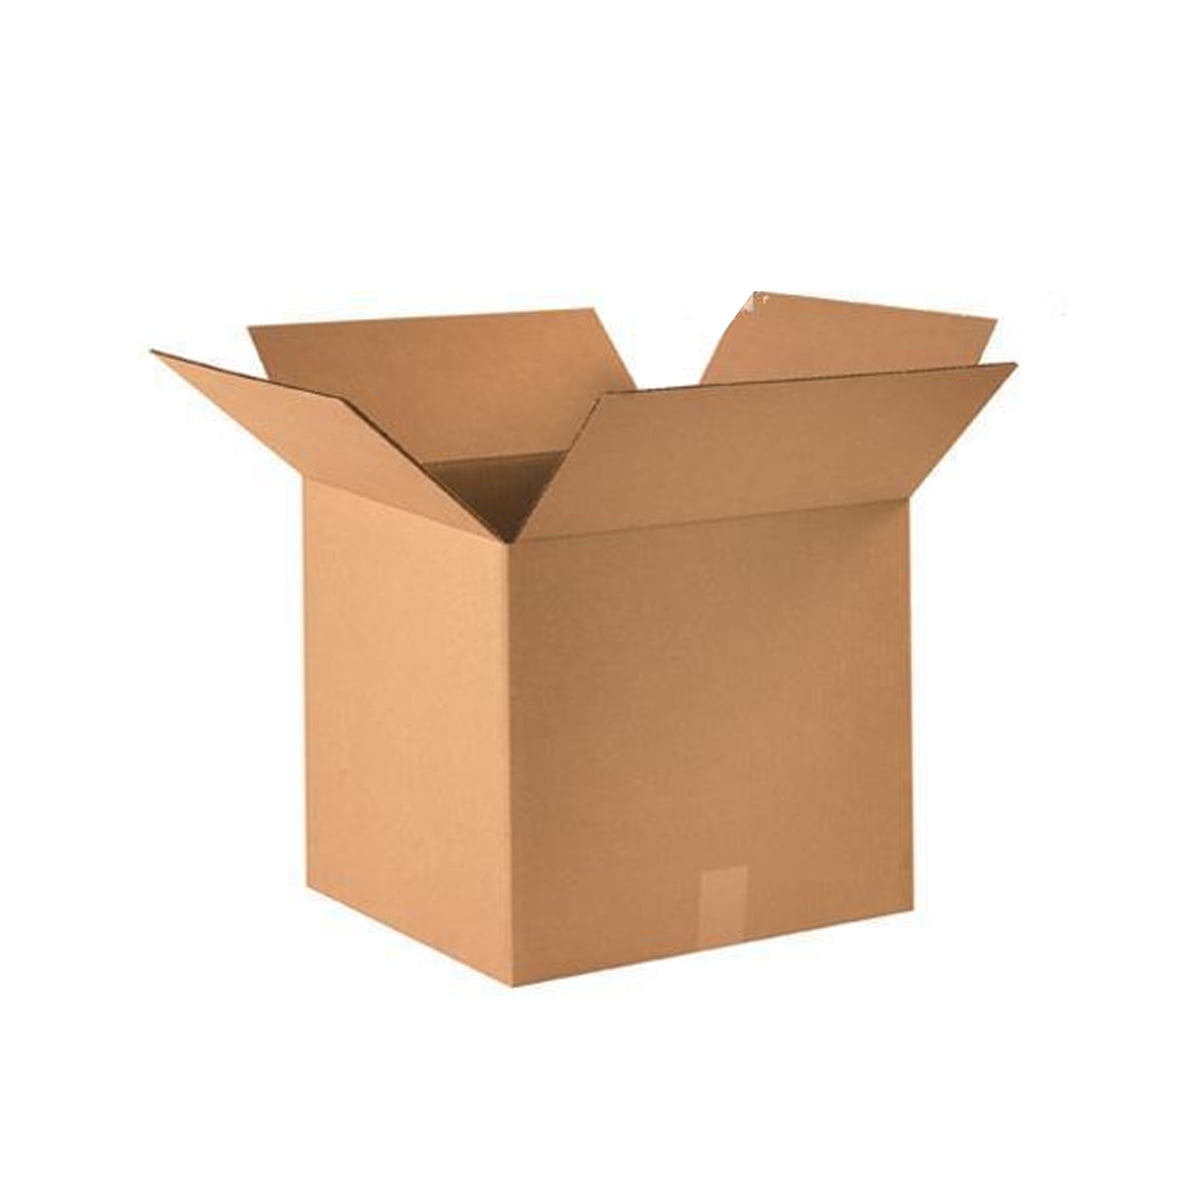 IDL Packaging 20L x 16W x 14H Large Box 100% Recyclable for Moving Brown Pack of 5 Shipping or Storing Items 